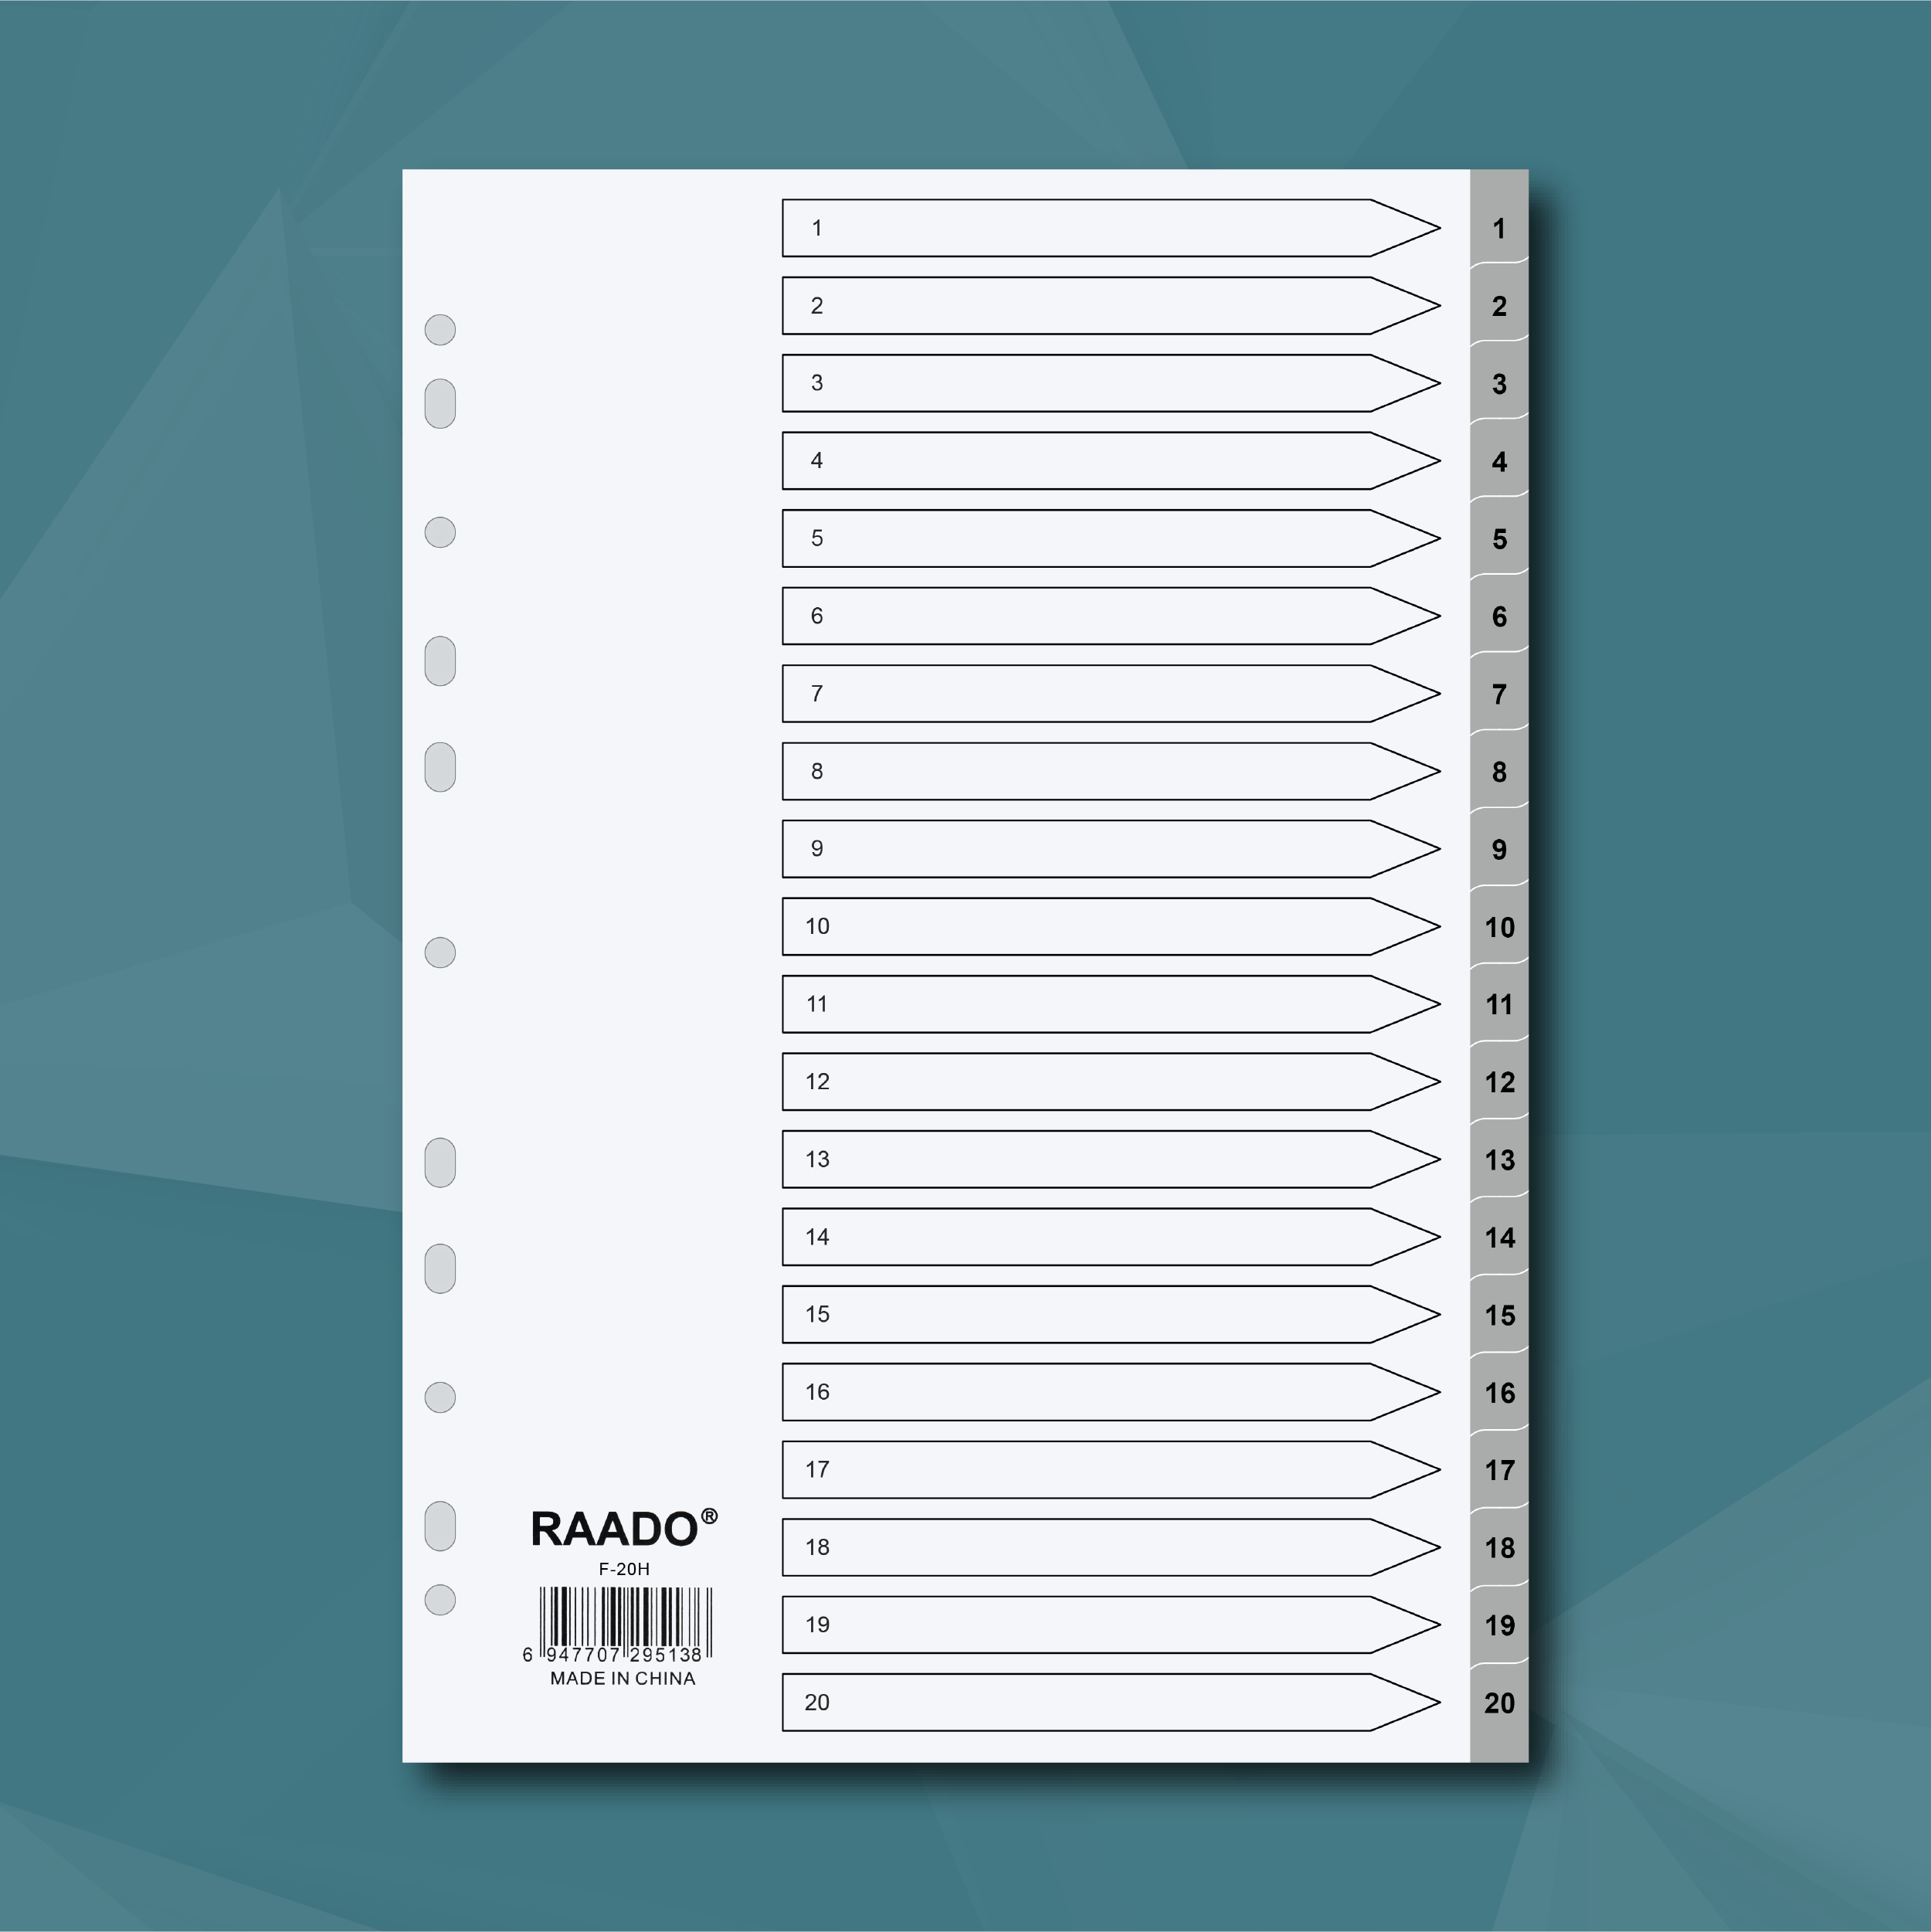 RAADO A4 PP Dividers, 1-20 with Numbering, Grey, 20-Tab (F-20H)